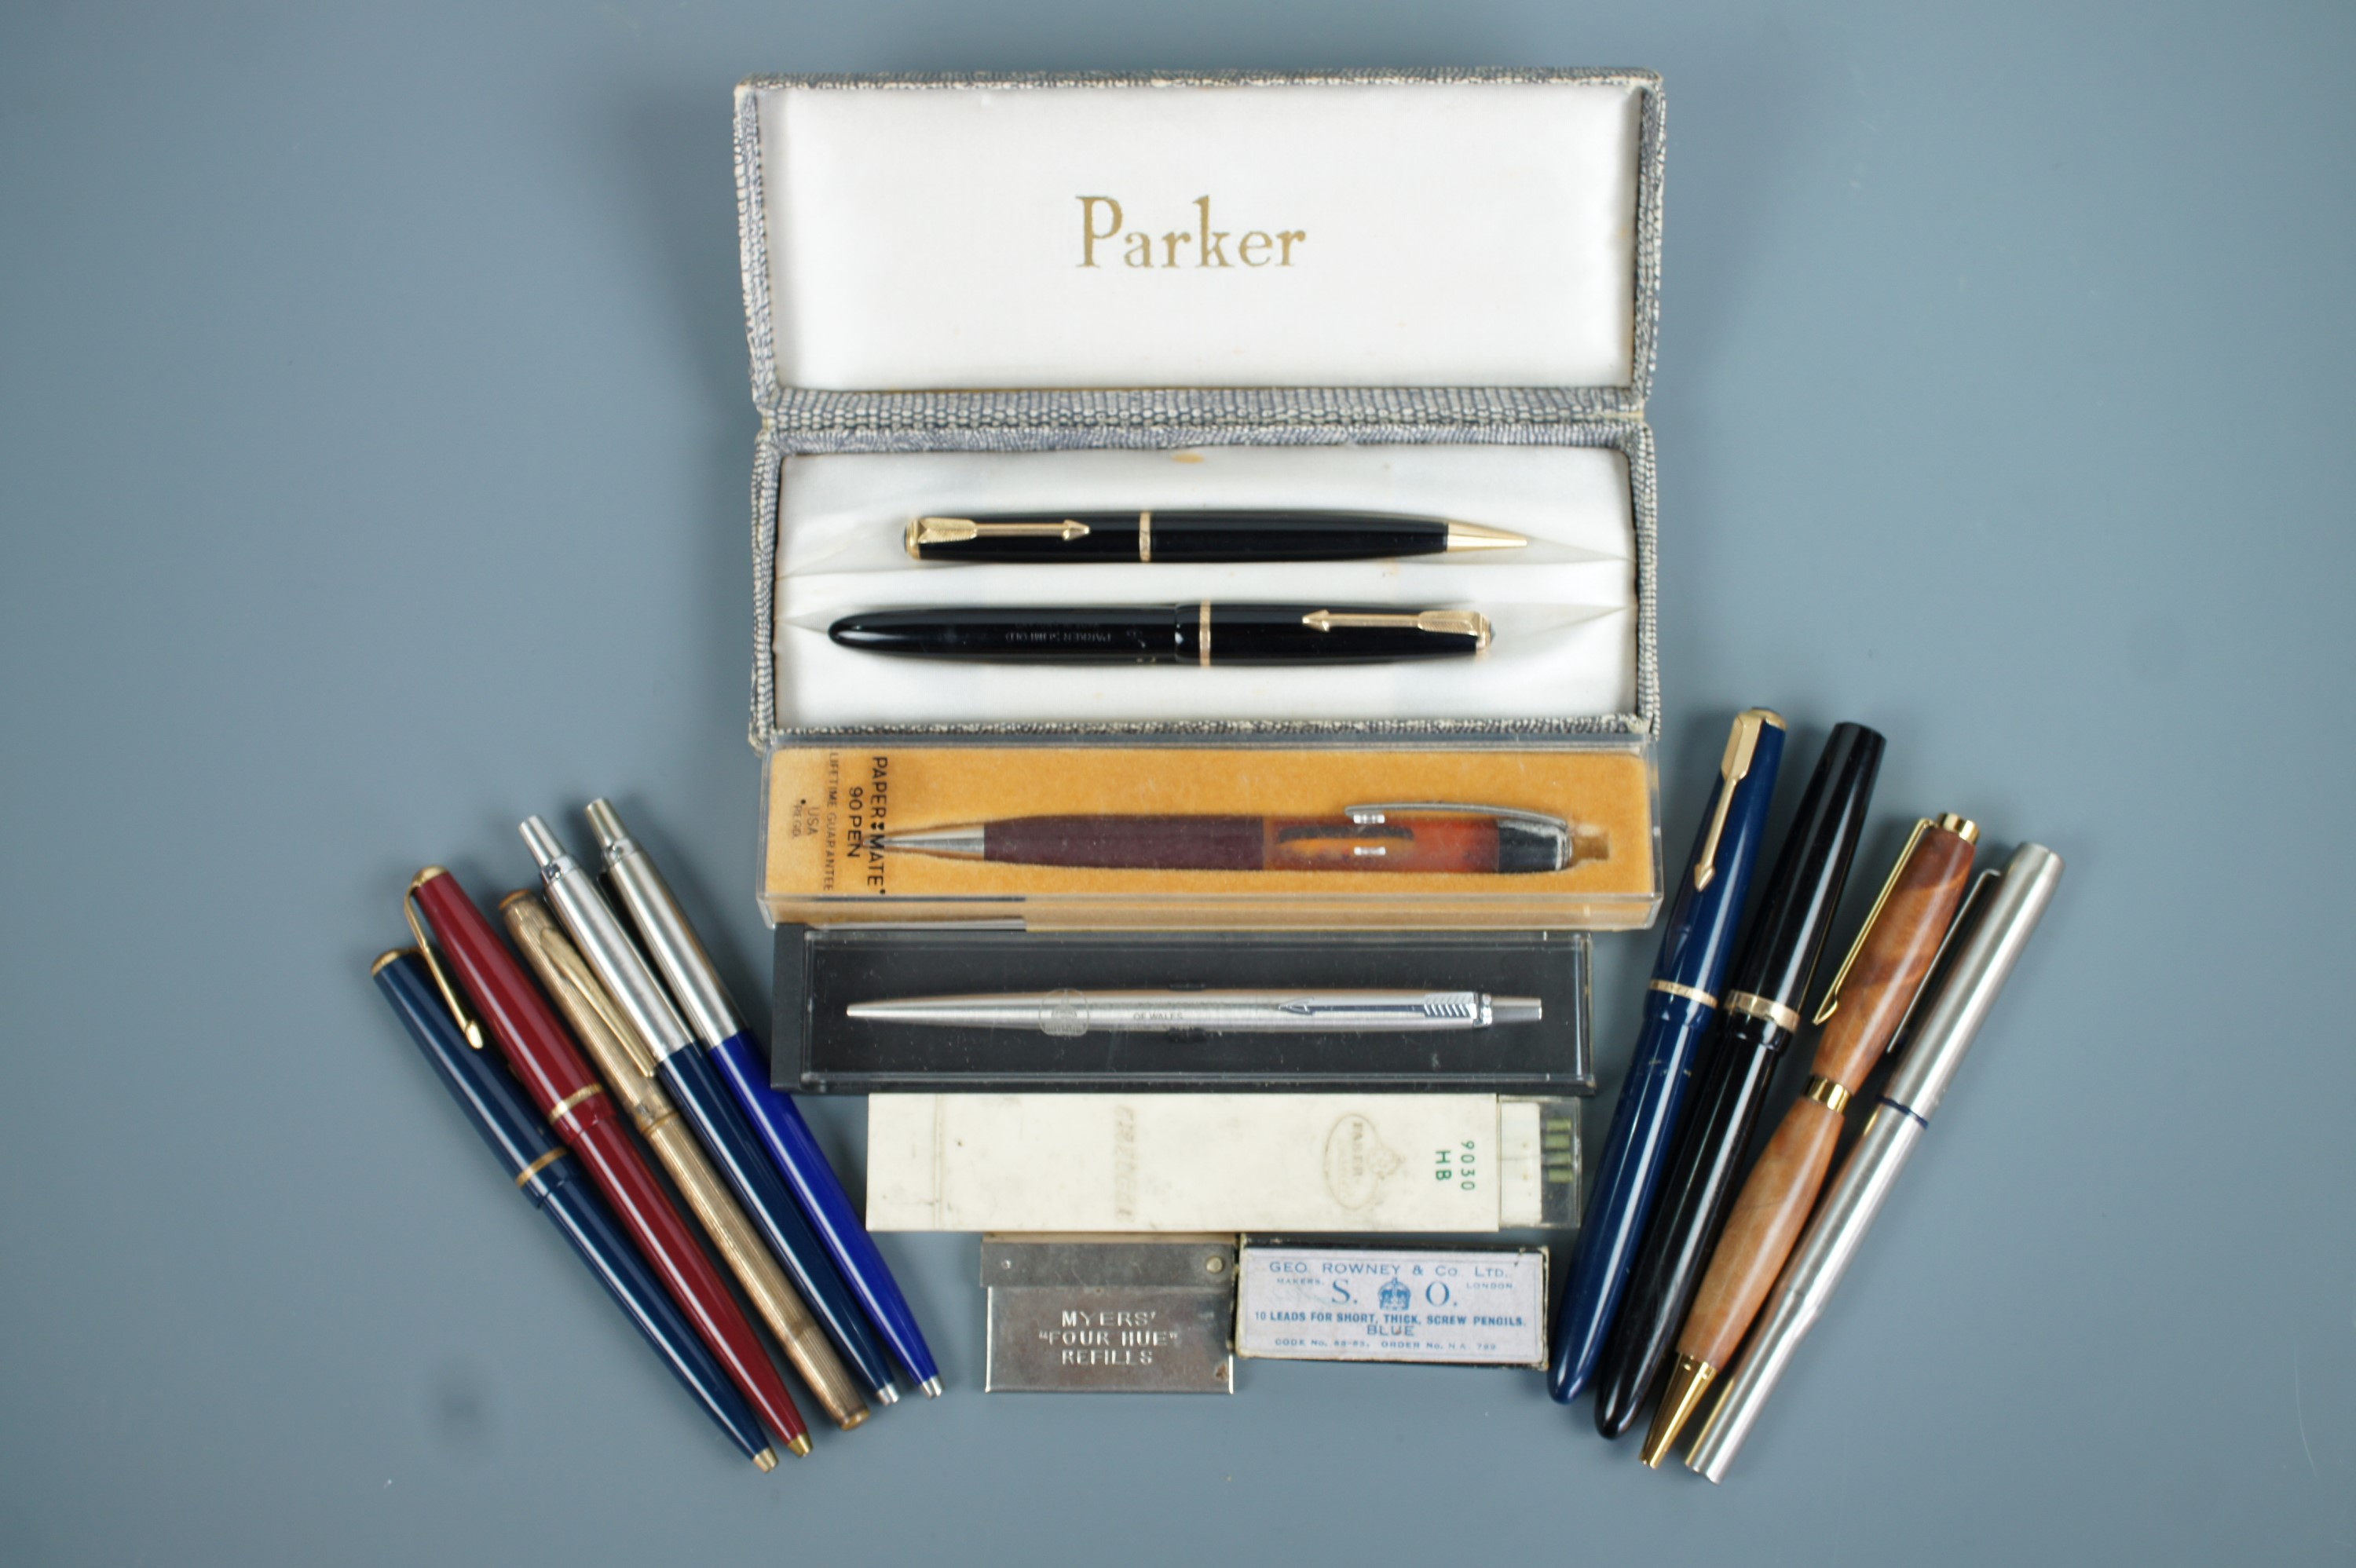 A Parker fountain pen together with a Parker and Papermate pens